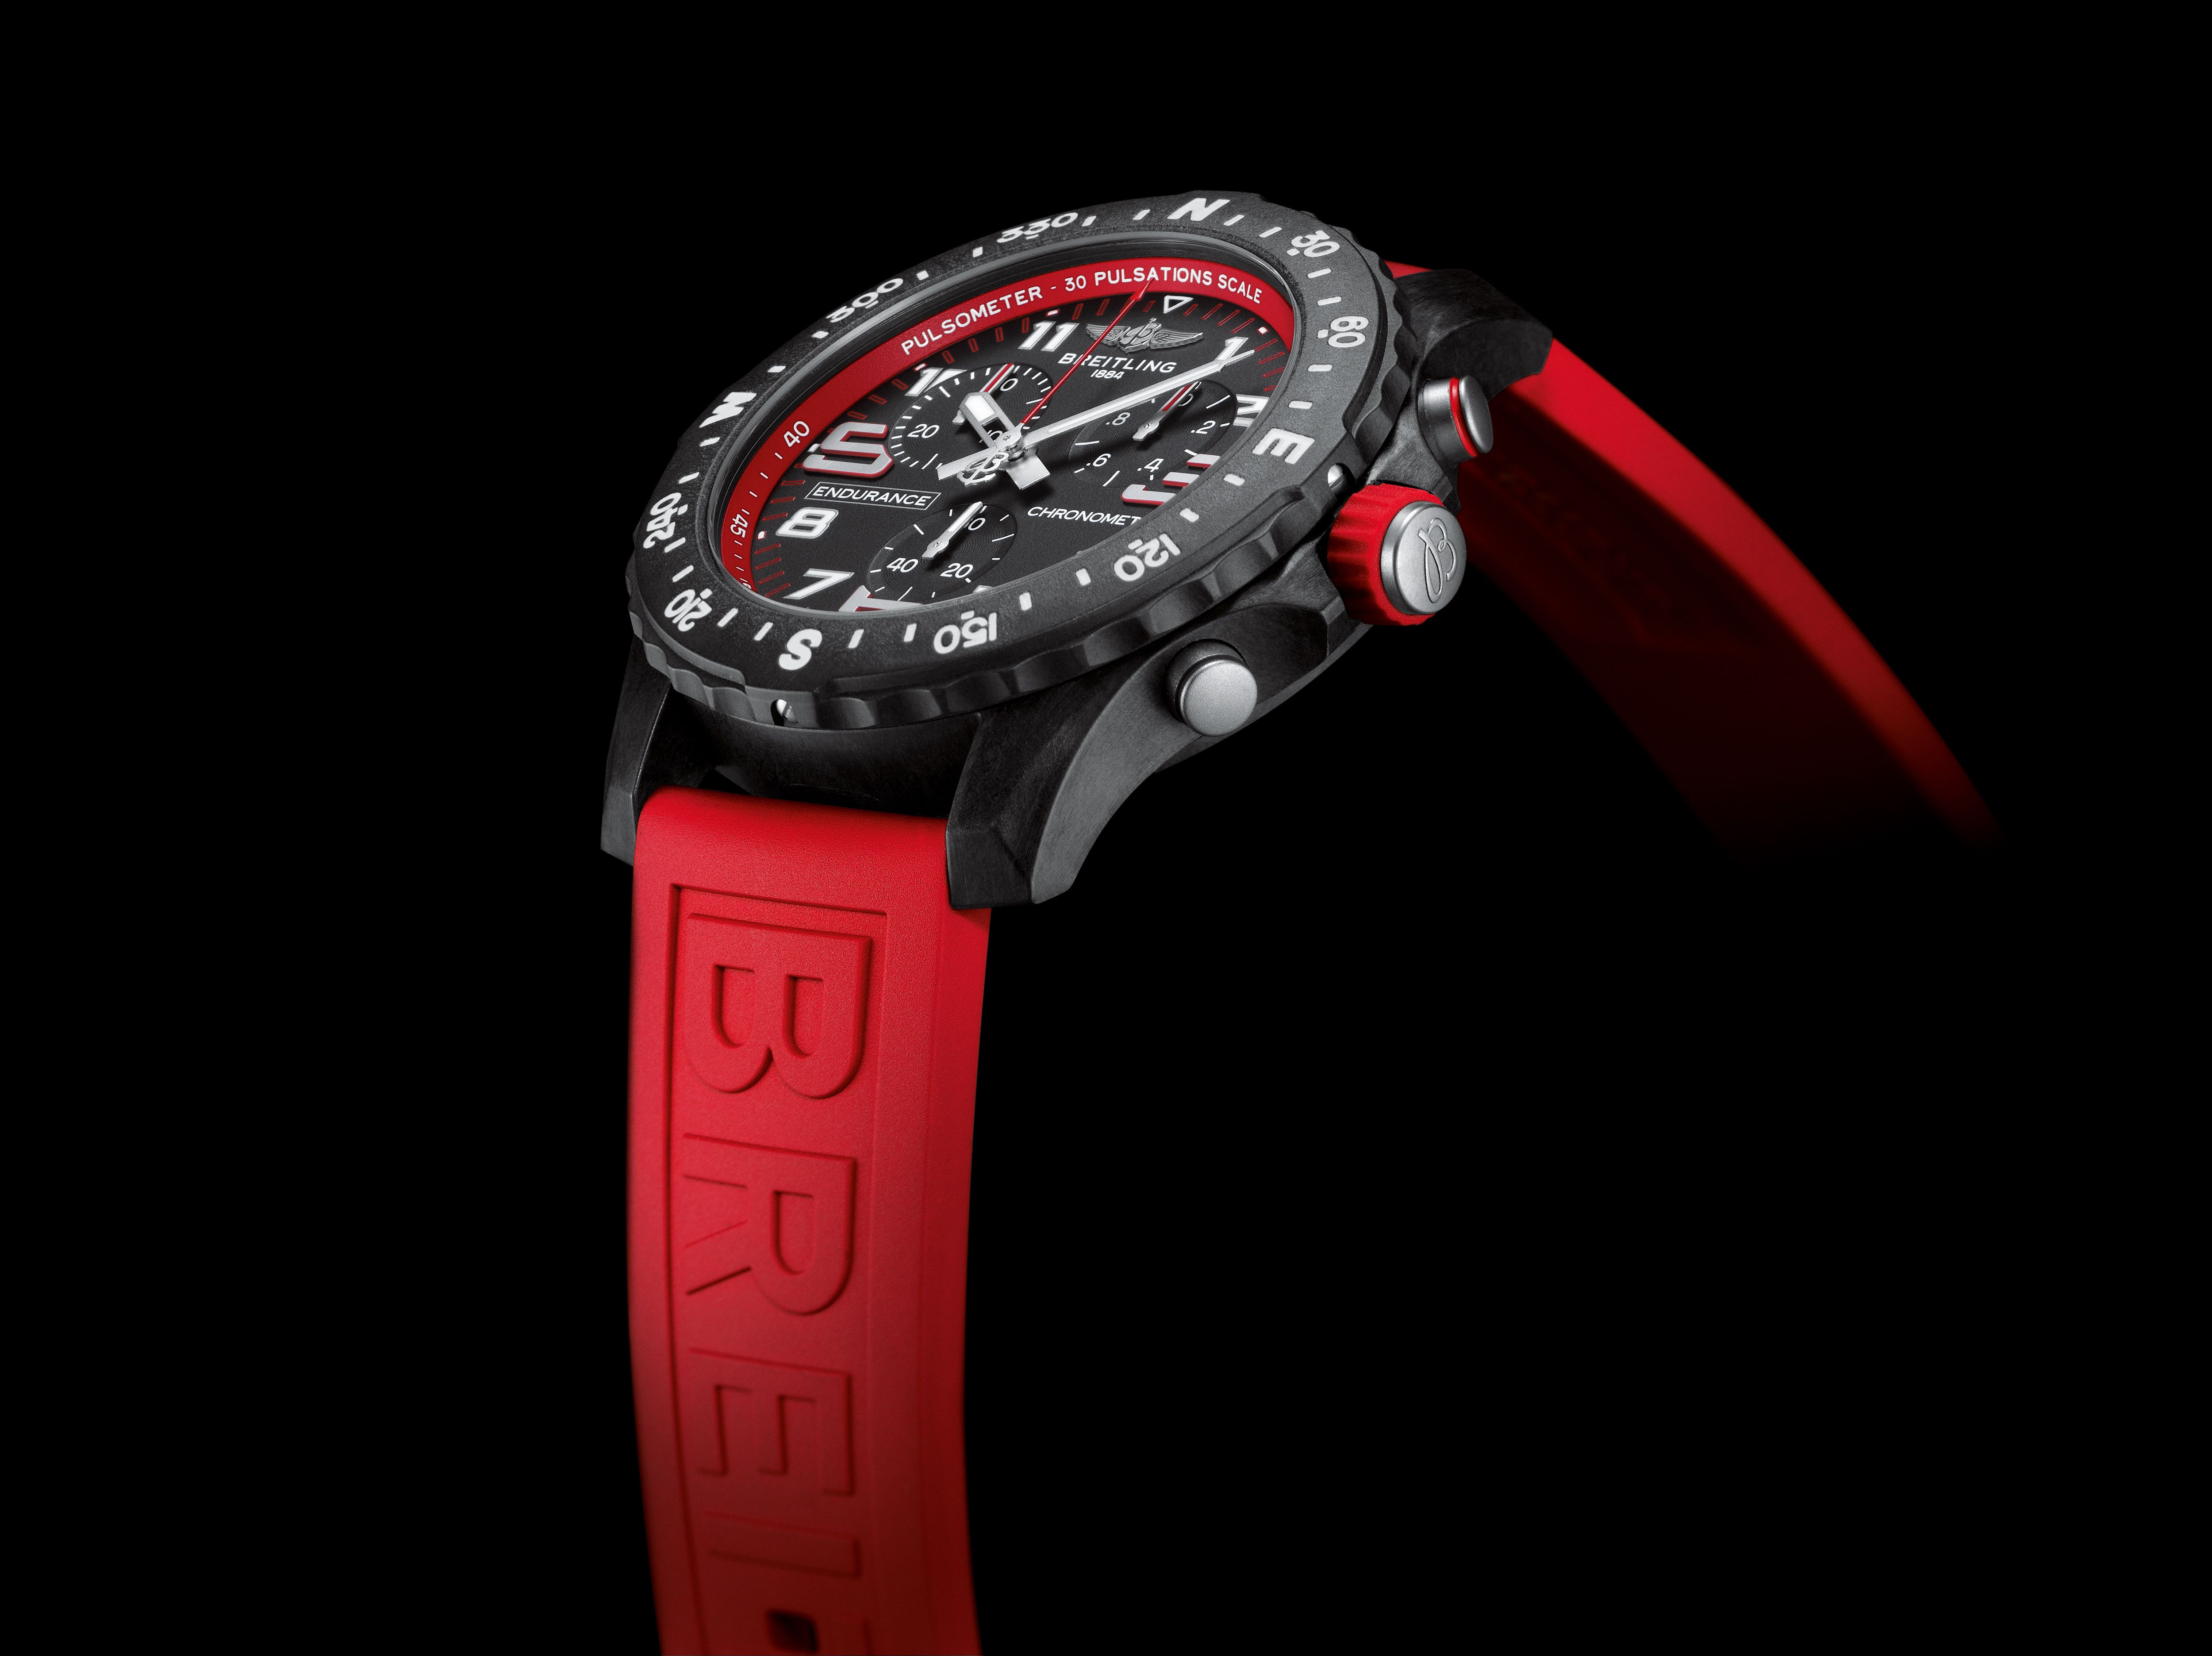 Breitling's Endurance Pro Watch Comes 